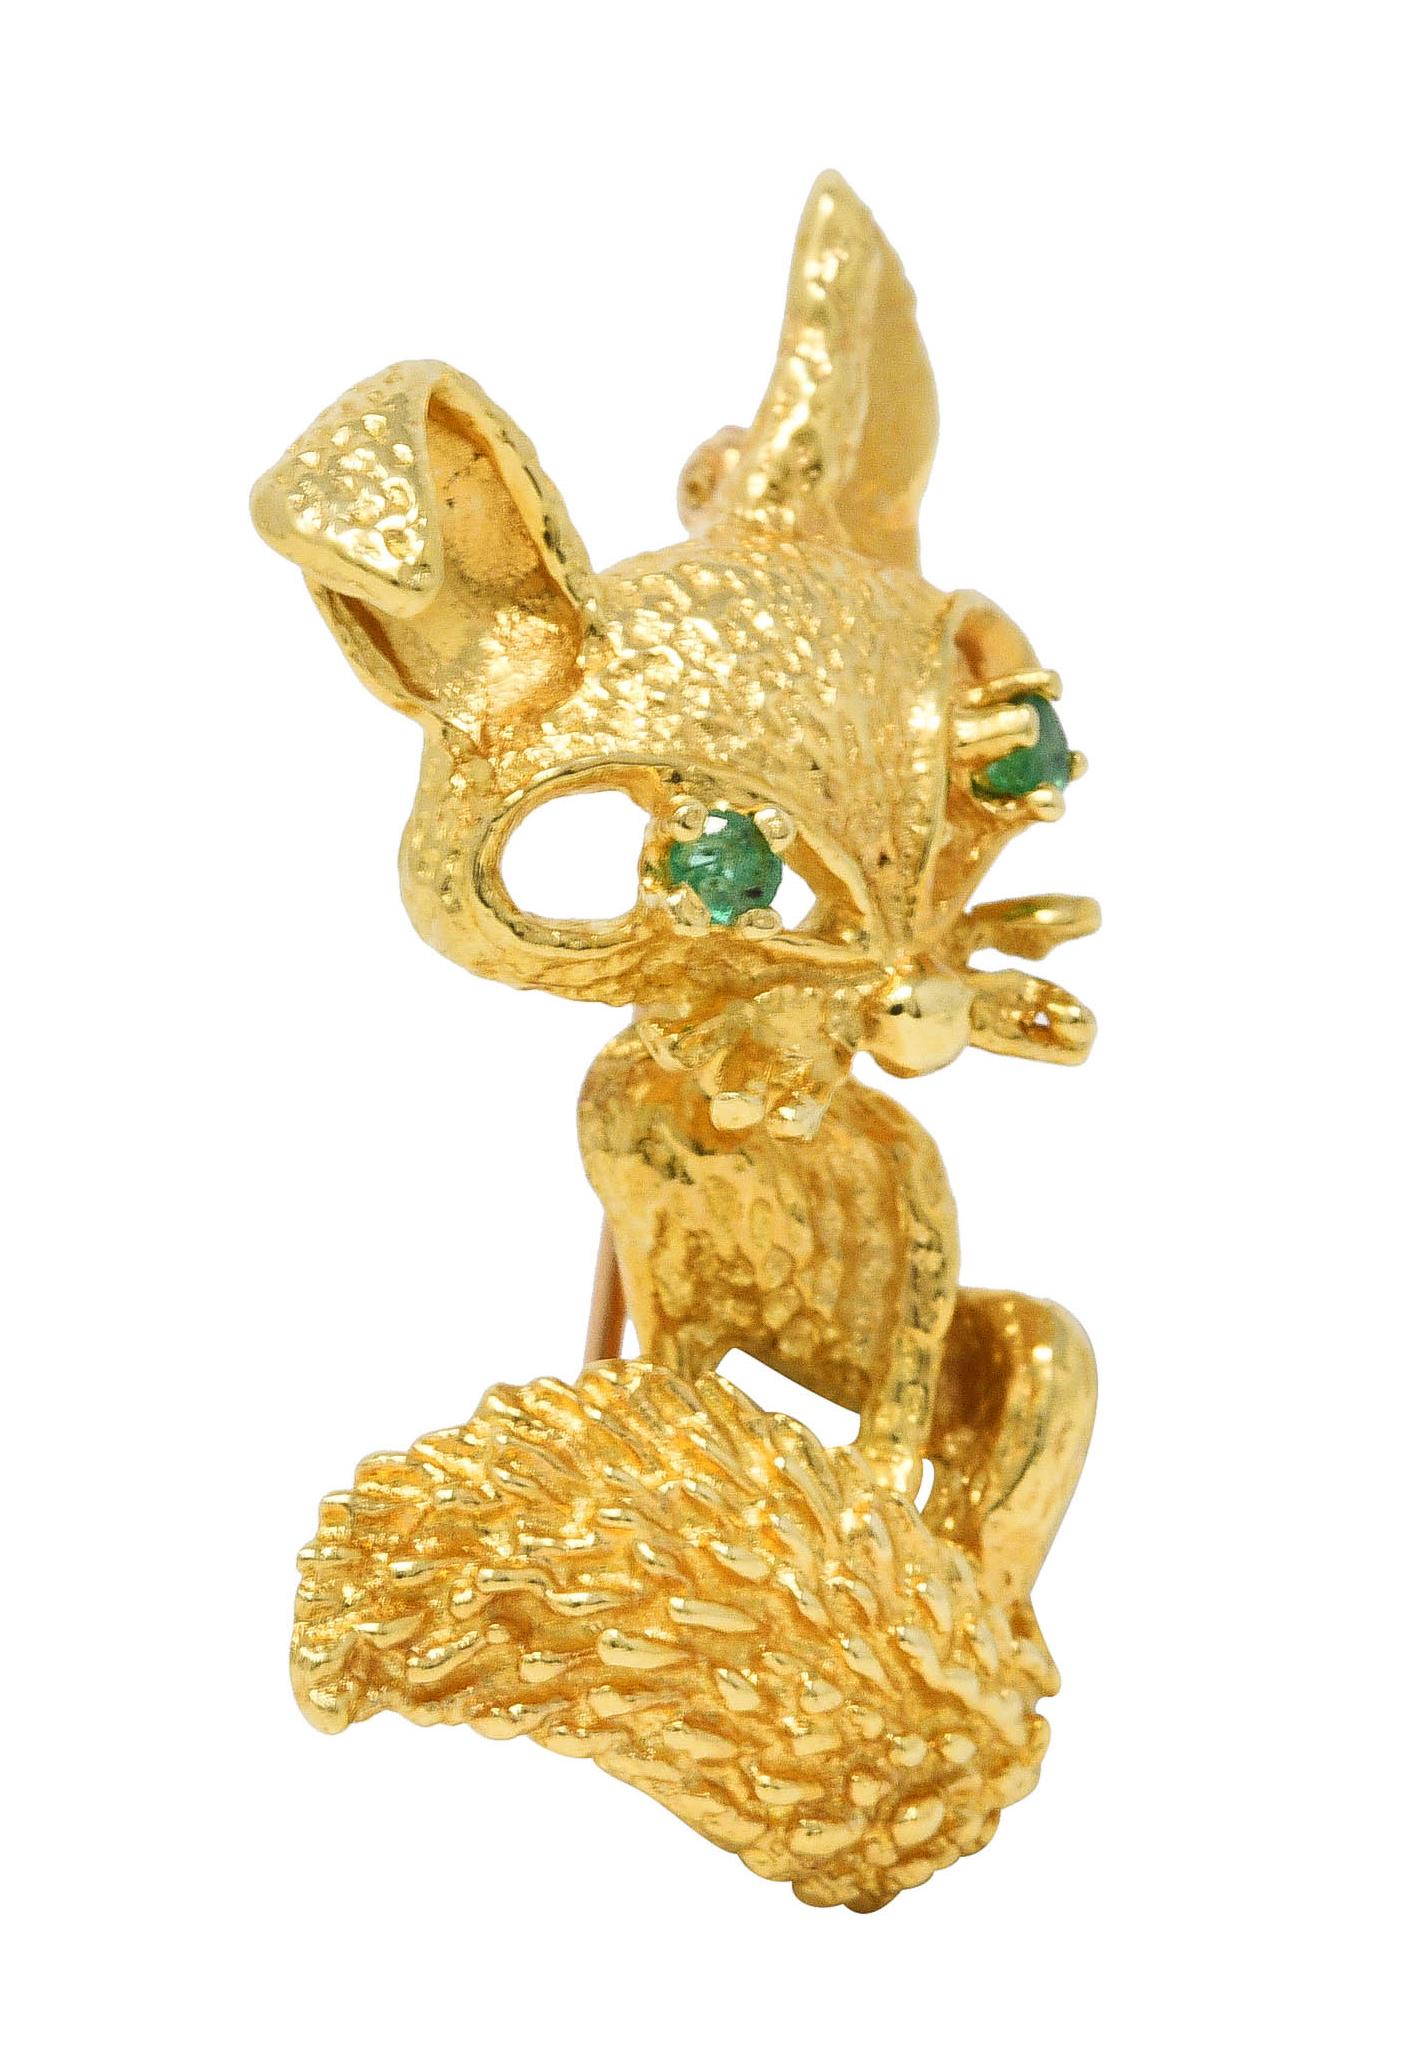 Brooch is designed as a stylized fox with bold features and a bushy tail

Accented by prong set round cut emerald eyes - transparent bright green

With textured fur throughout

Completed by hinged pinstem with locking closure

Stamped 18k for 18